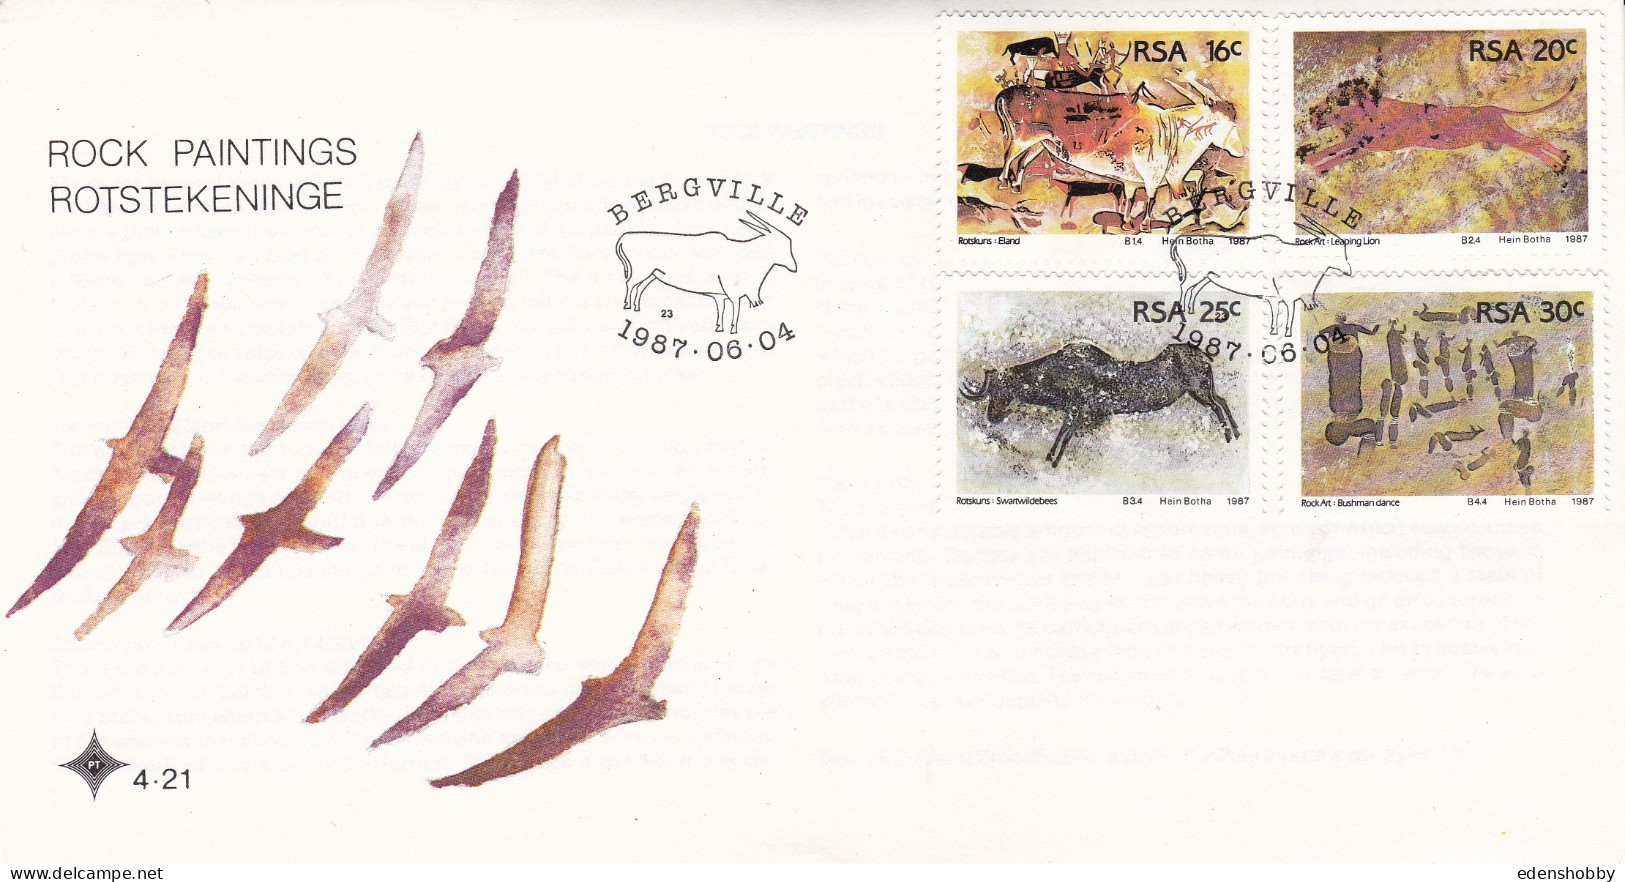 1987 SOUTH AFRICA RSA 1987 6 Official First Day Covers FDC 4.2 4.20.1 4.21 4.22 4.22.1 4.23 - Briefe U. Dokumente